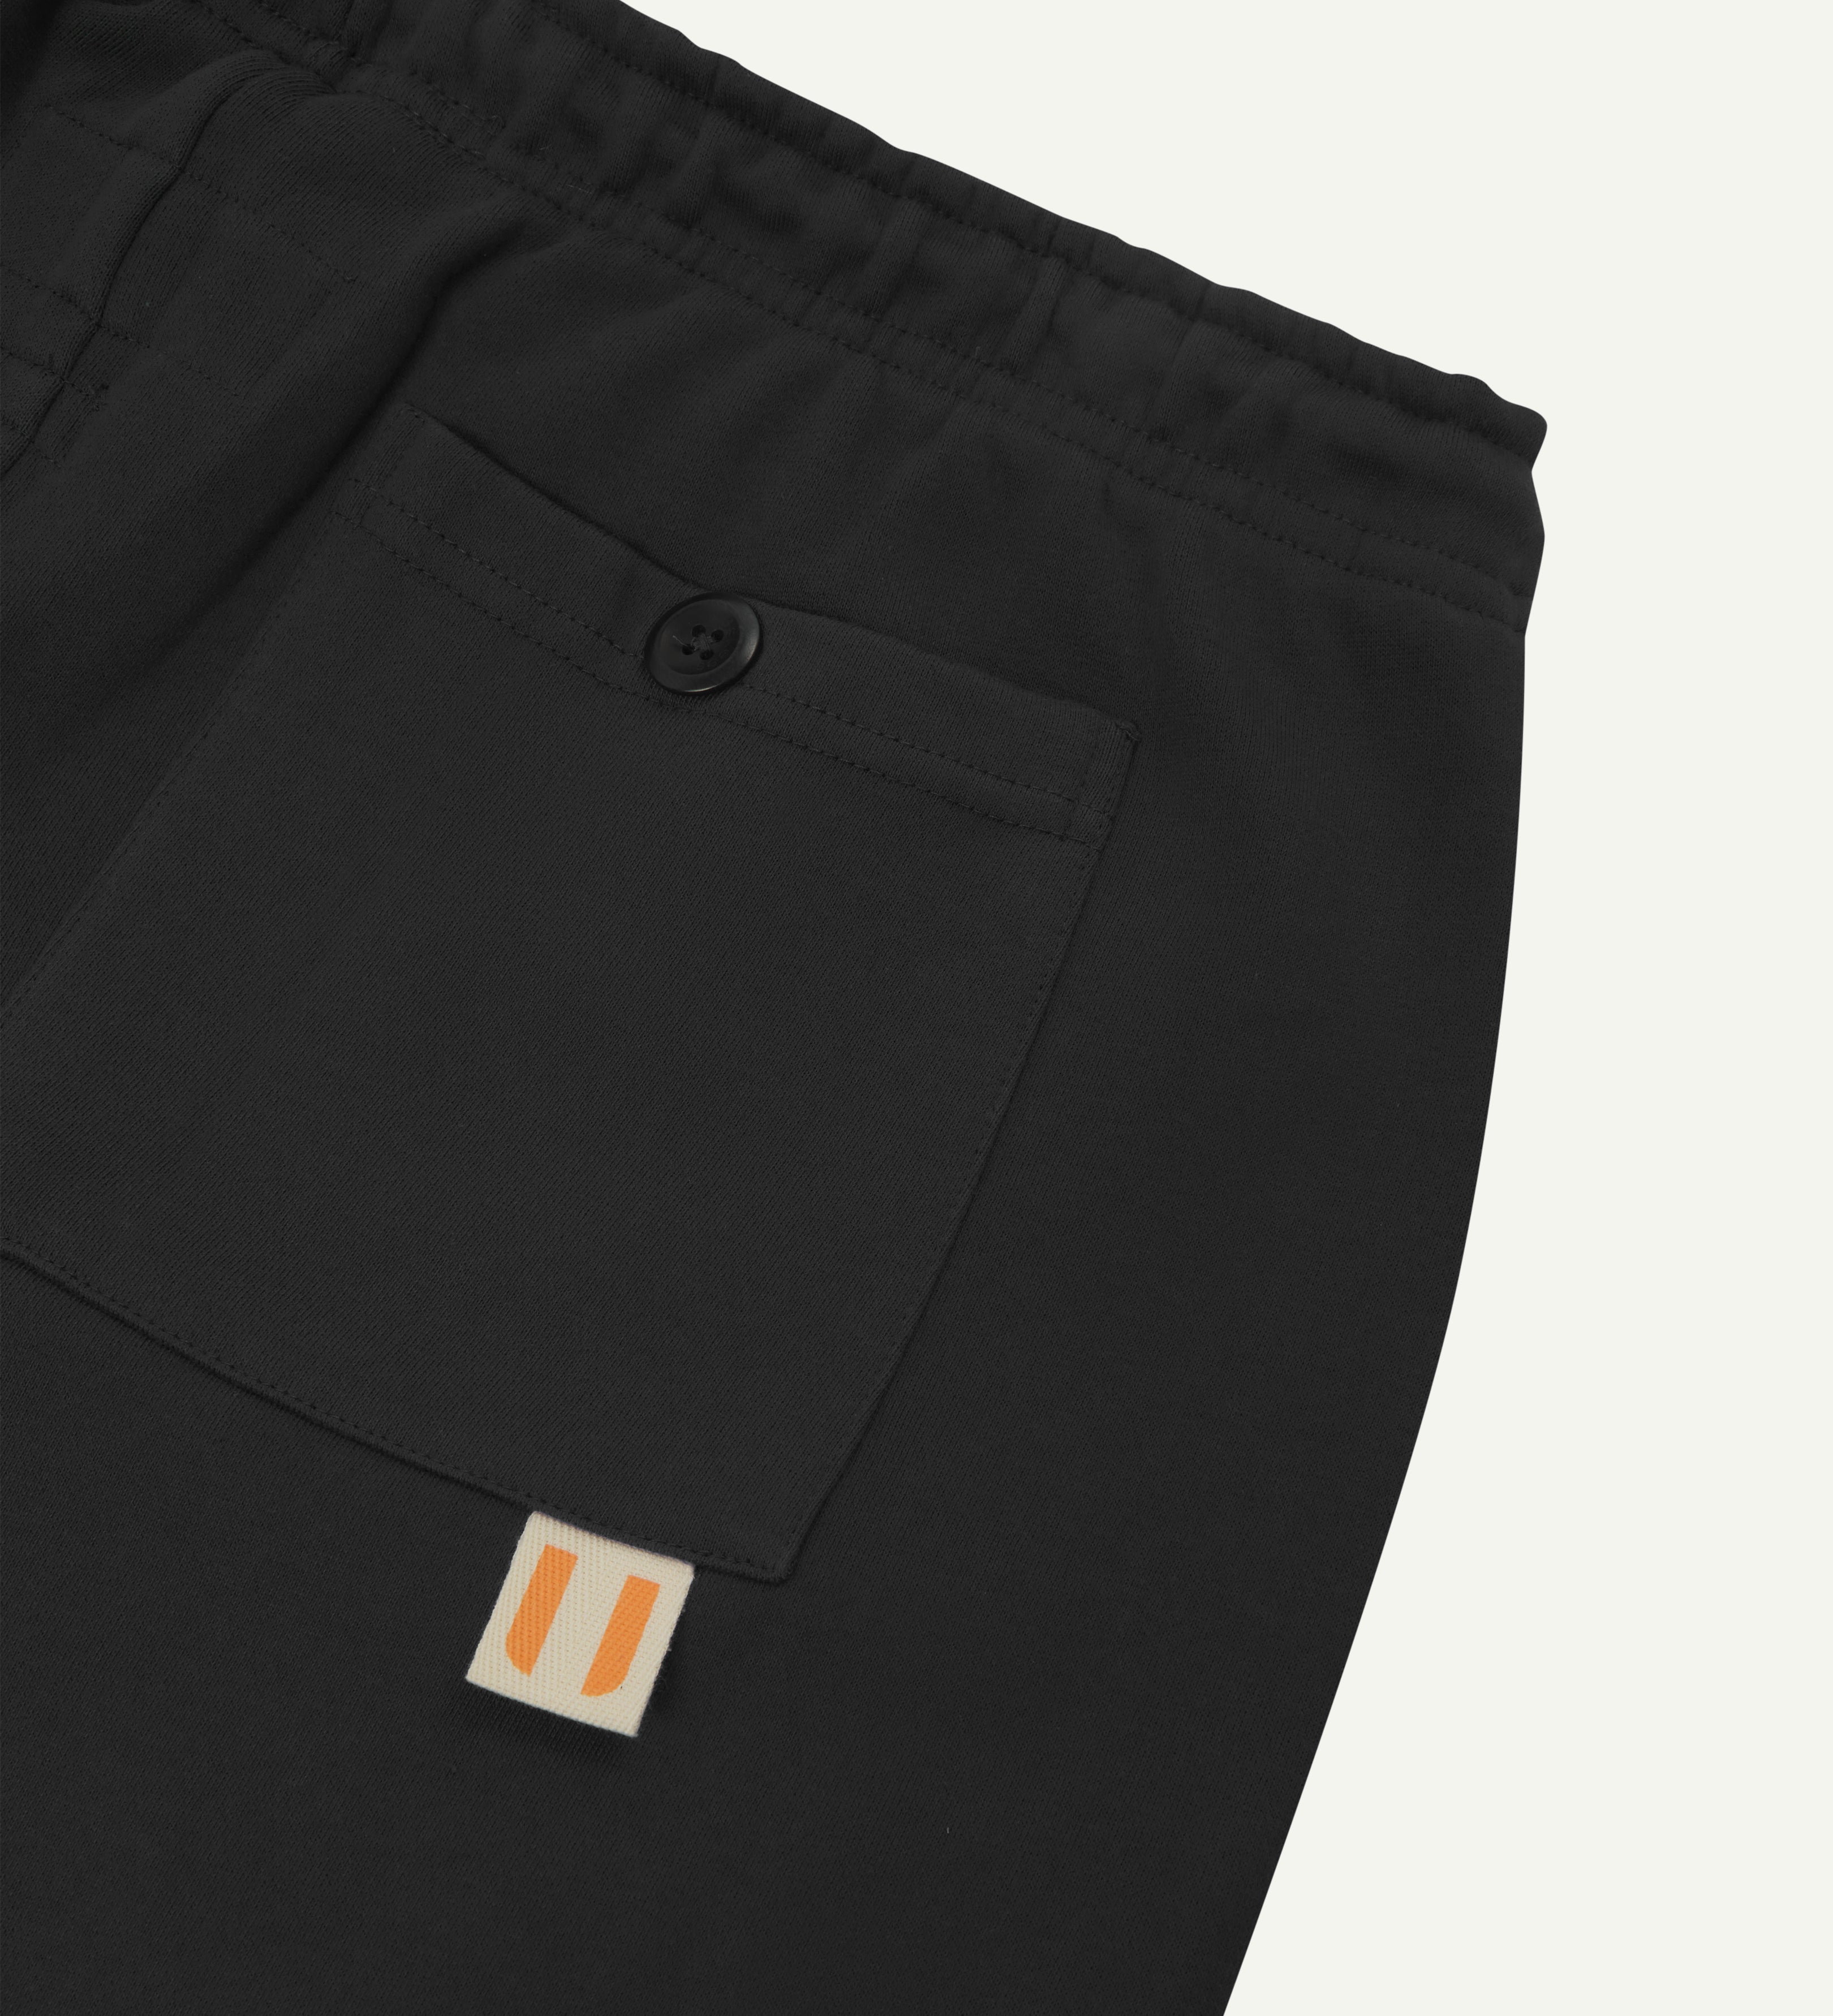 Back close-up view of dark grey organic cotton Jogging Pants for men by Uskees showing back buttoned pocket and logo label.